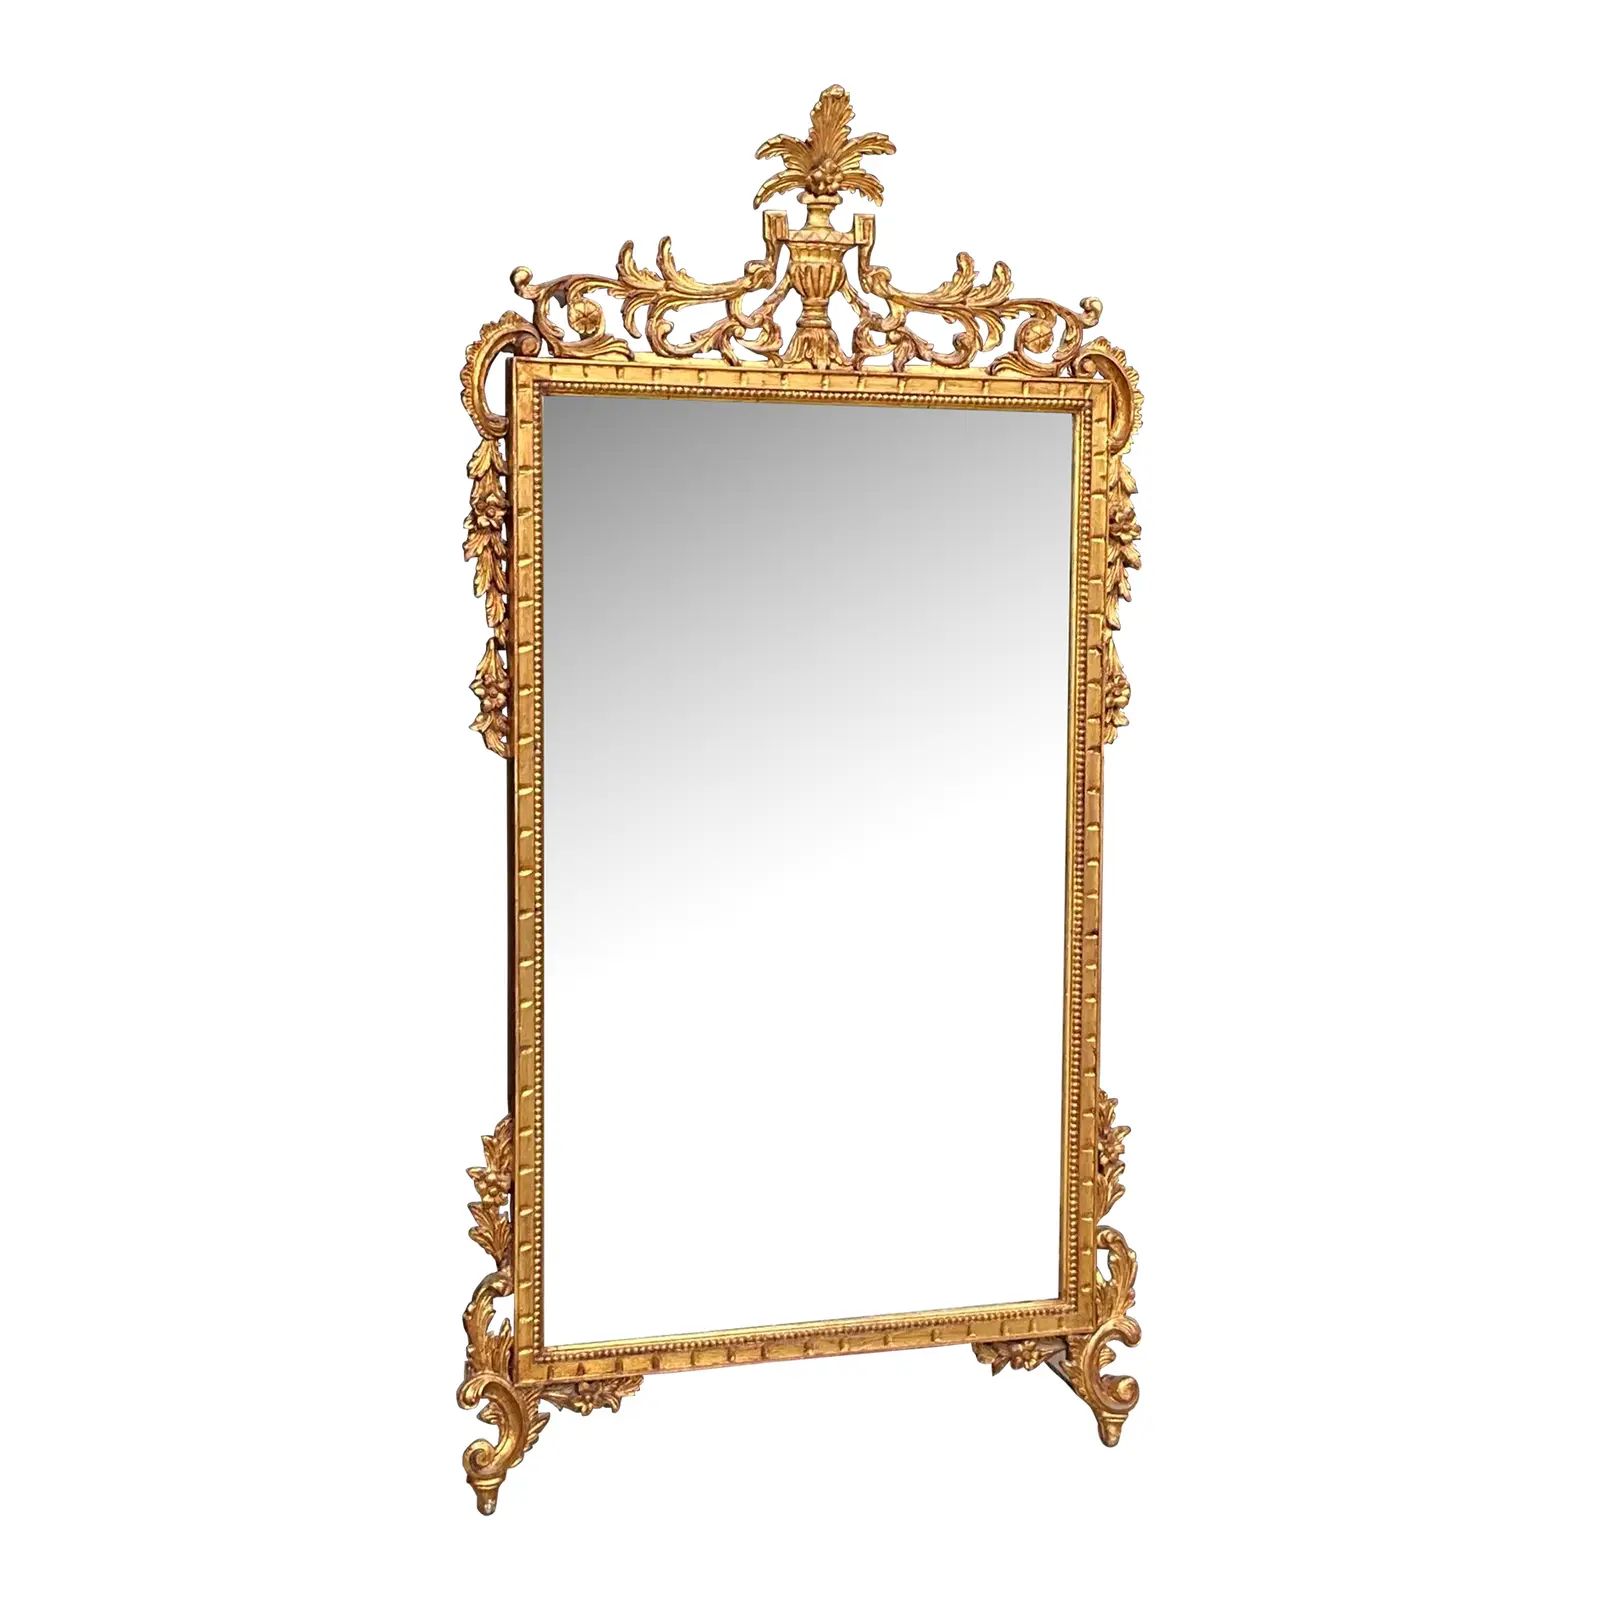 1950s Large Carved Giltwood Foliate Chippendale Style Italian Mirror | Chairish